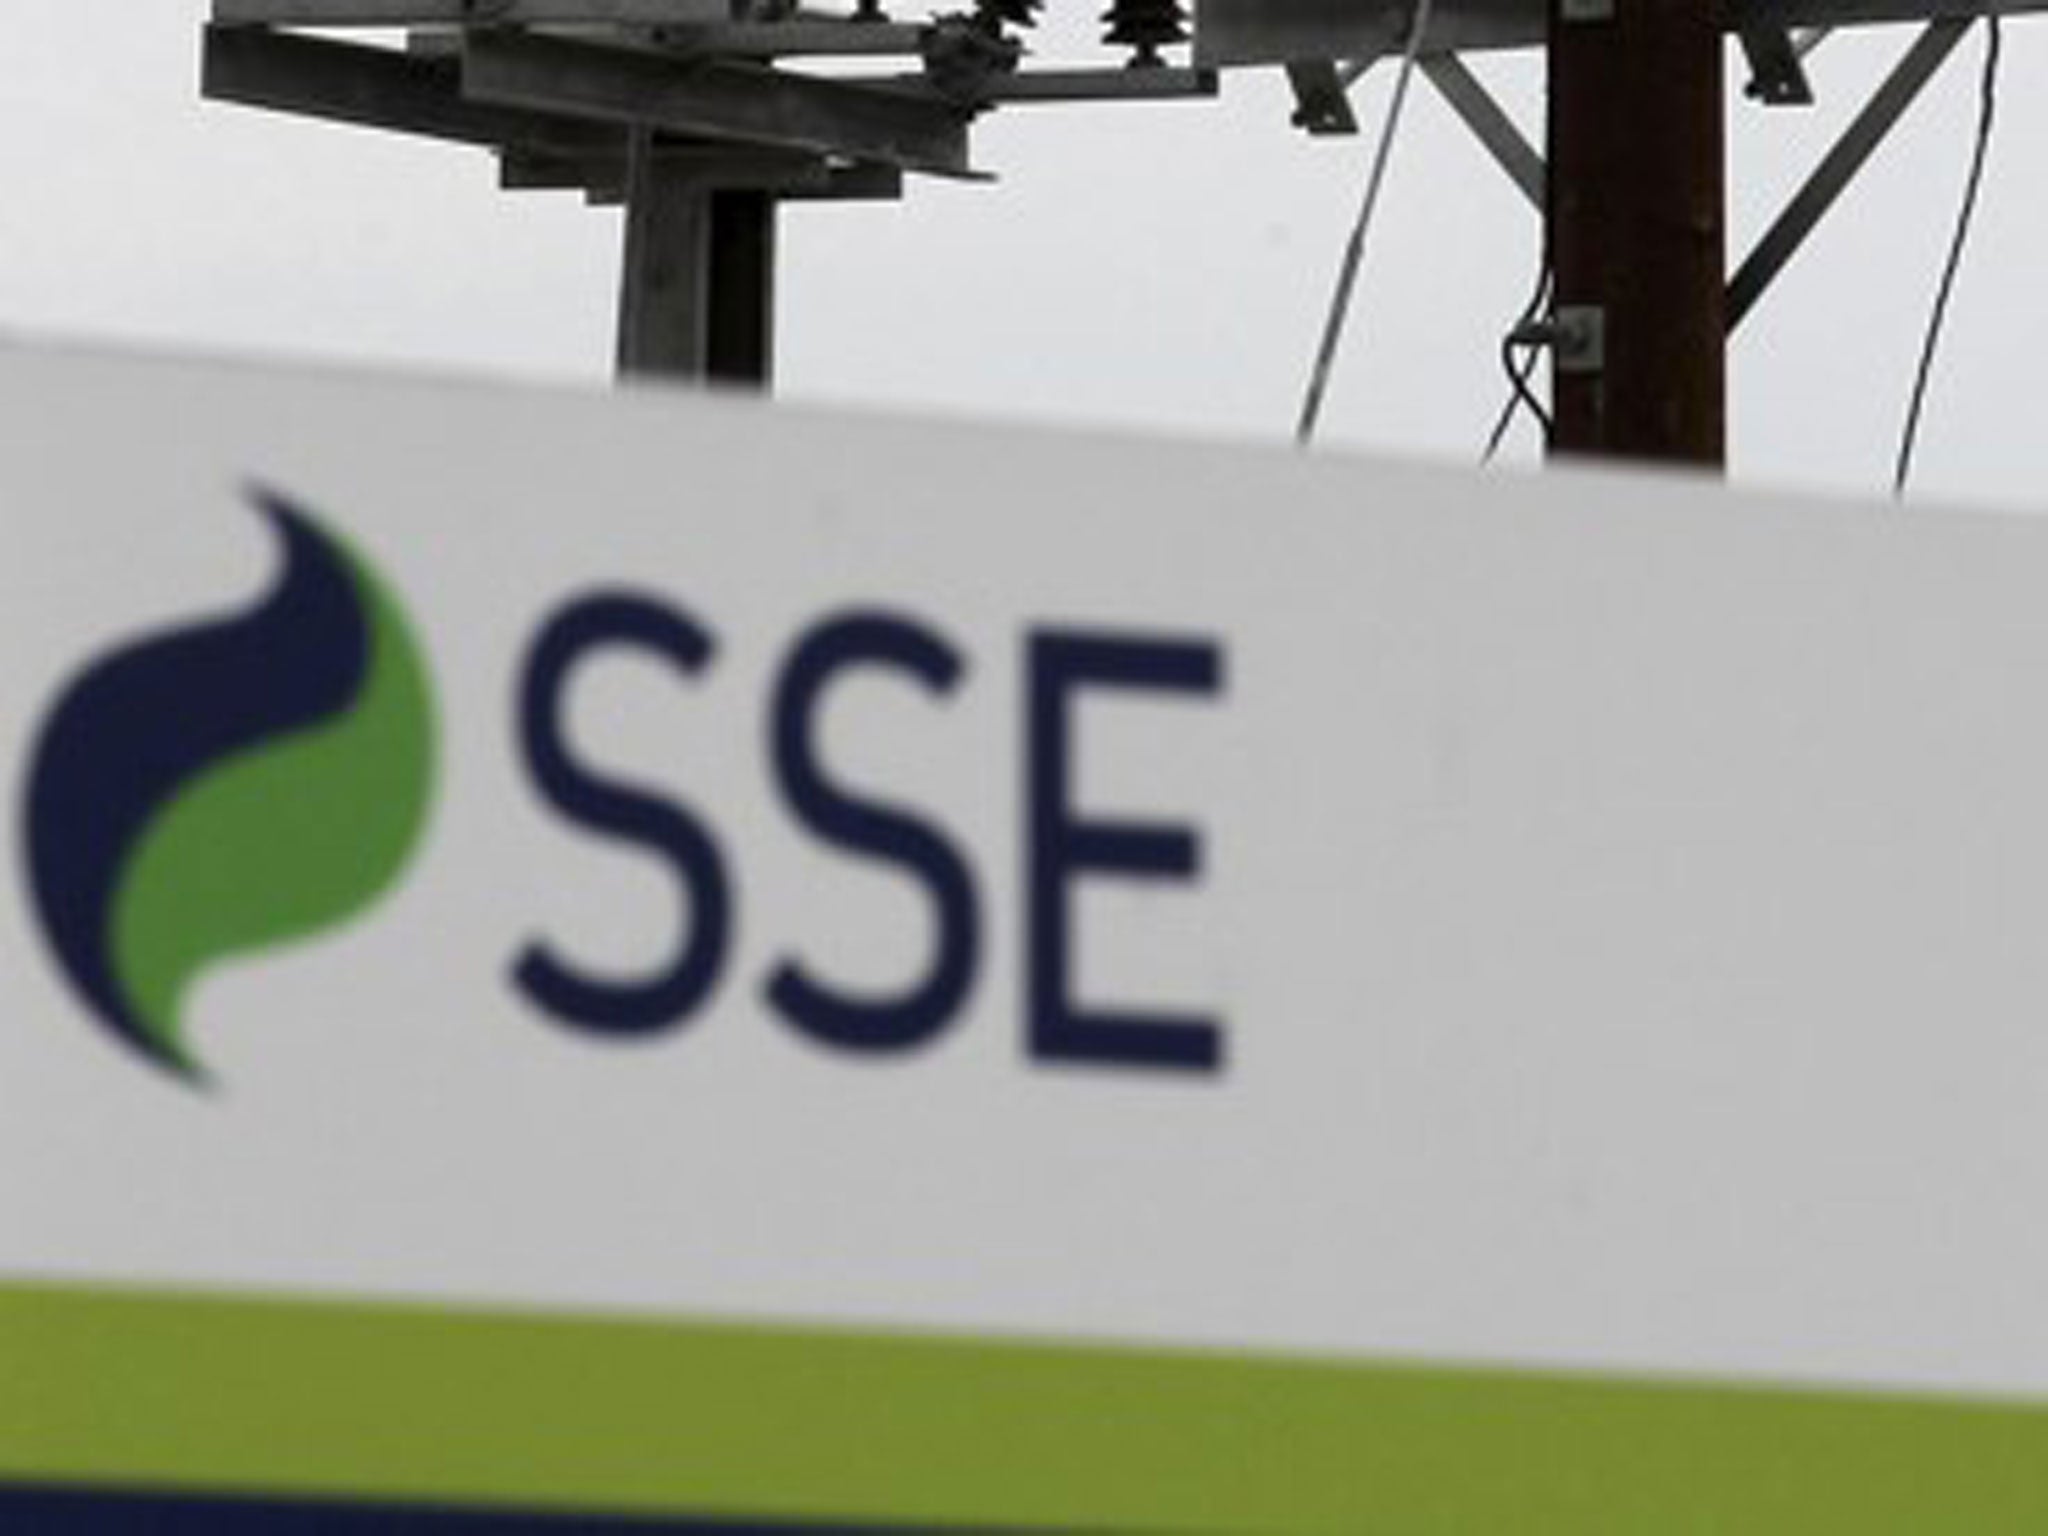 Big Six energy providers SSE to freeze energy prices until 2016